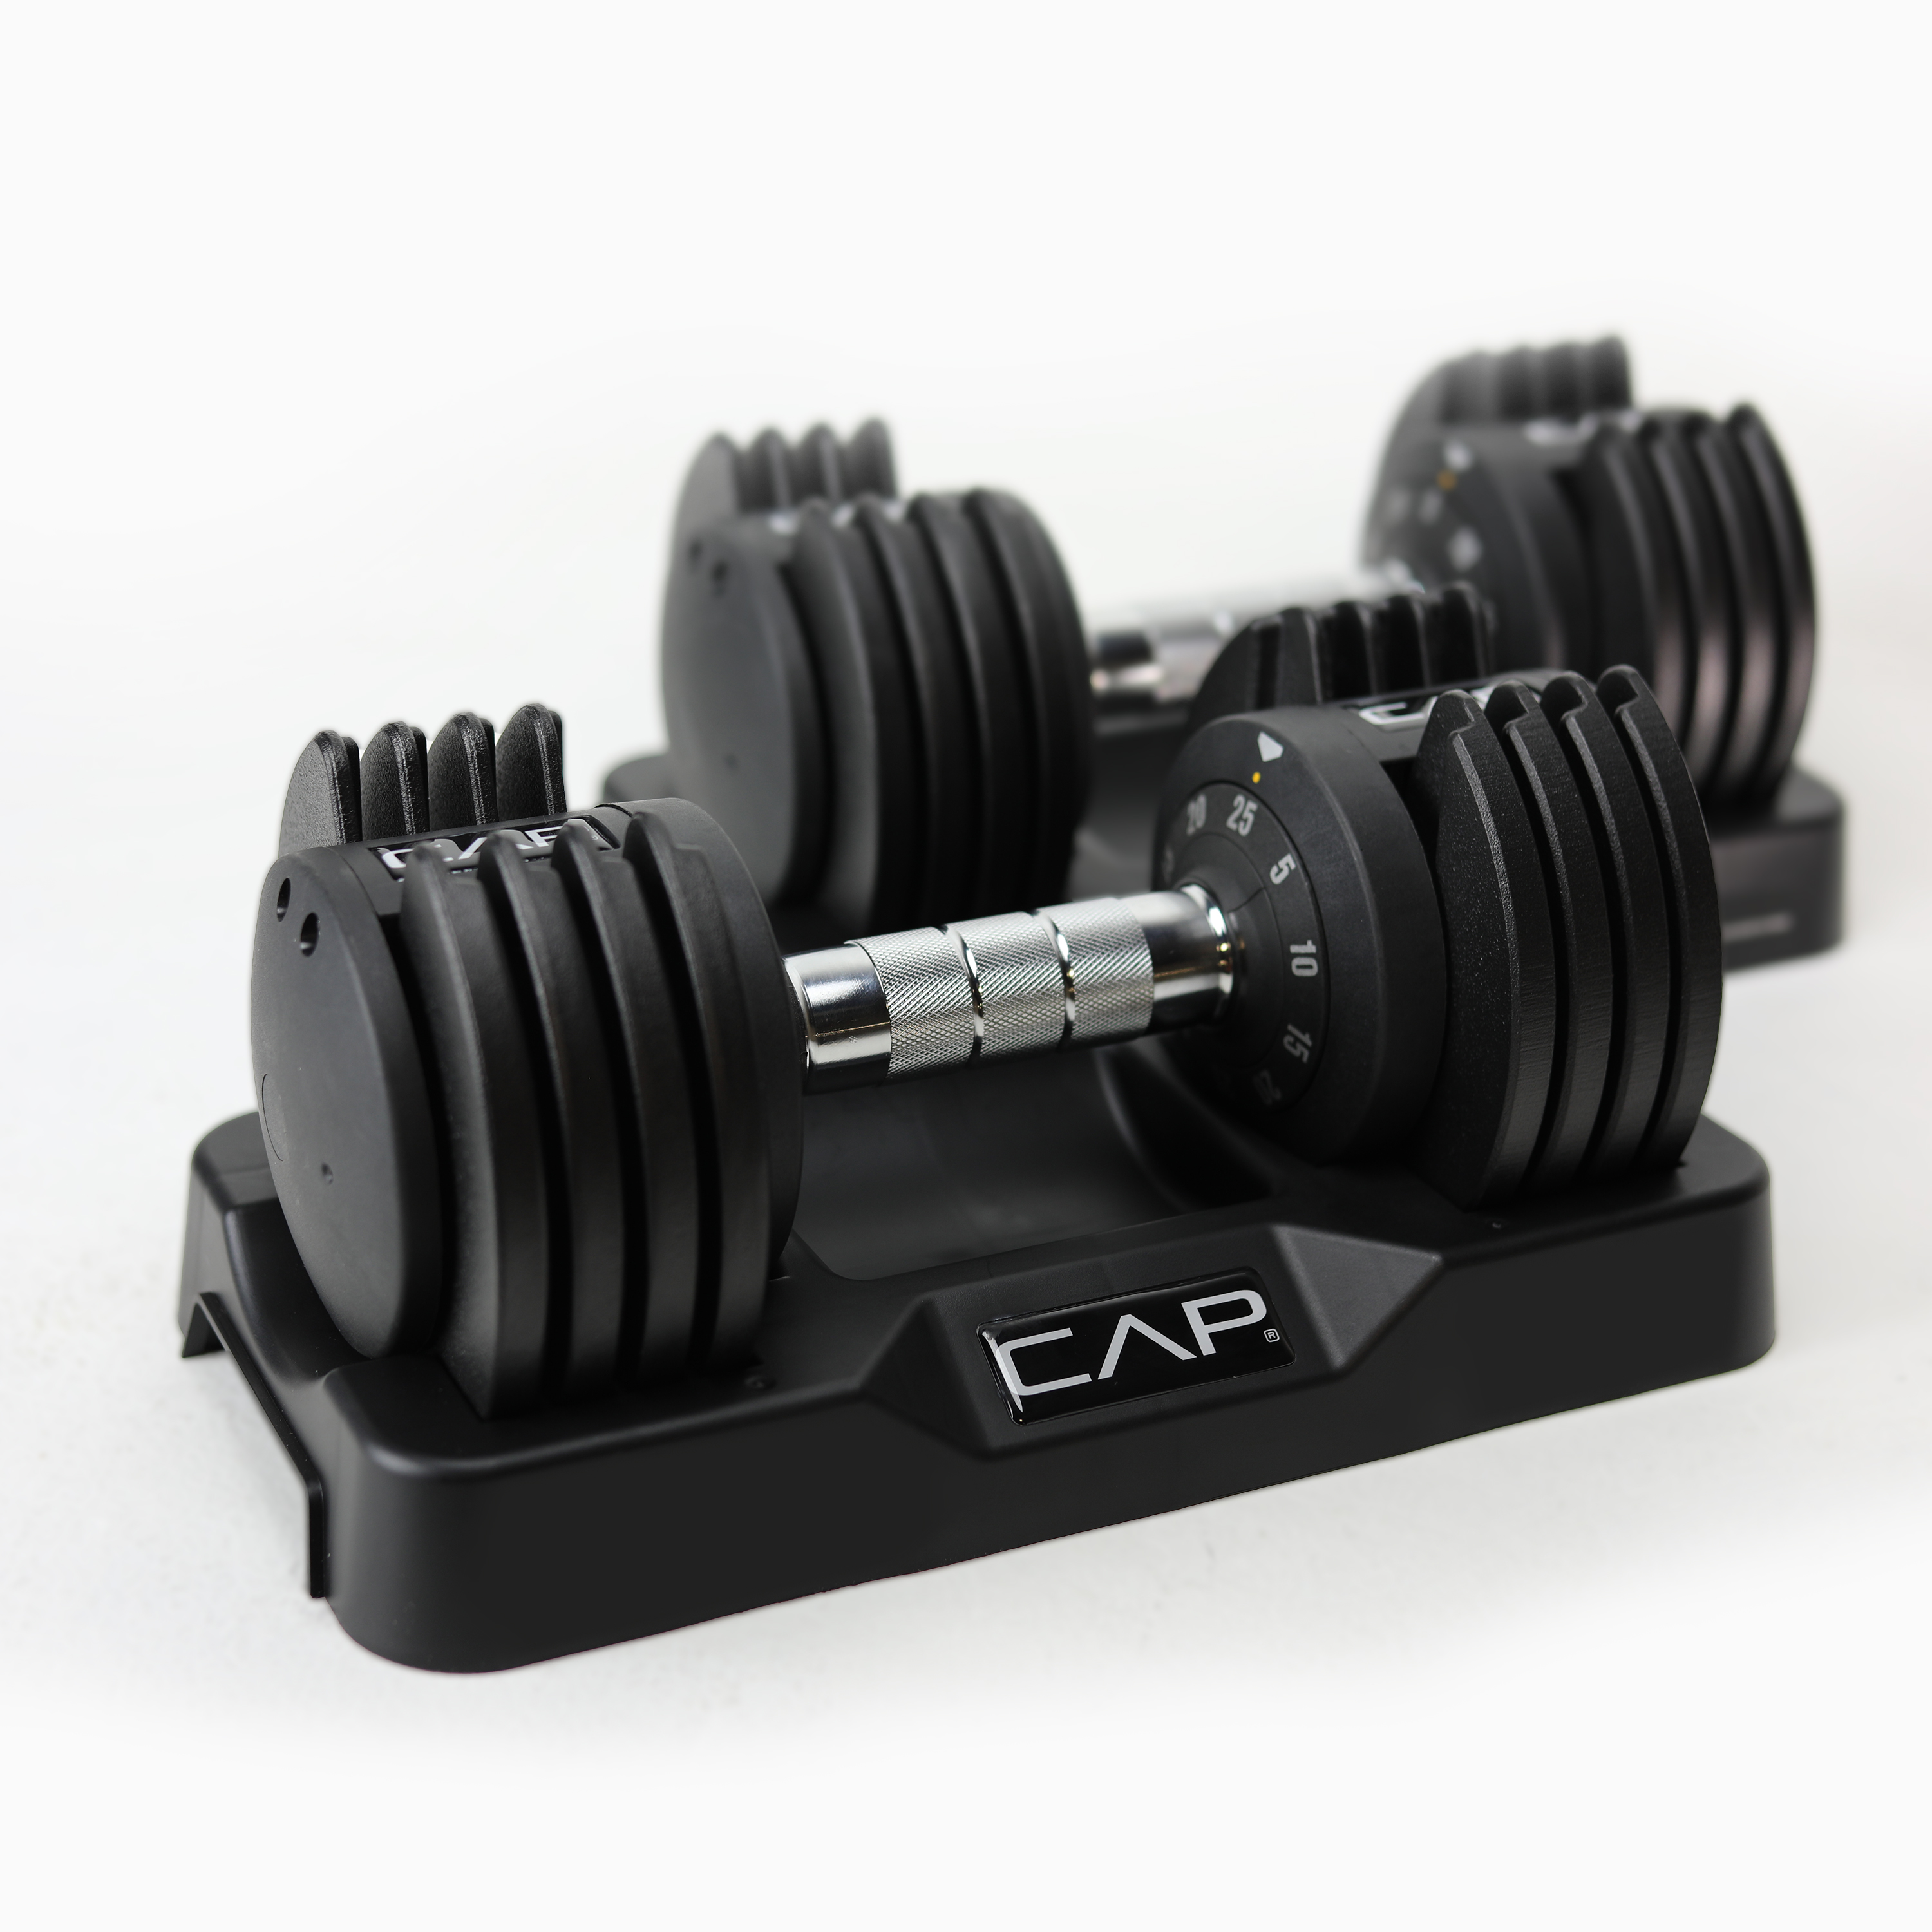 CAP Barbell 25 lb Adjustable Dumbbell Set, Quick Select Adjustability from 5-25 lb, Pair, Black - image 2 of 7